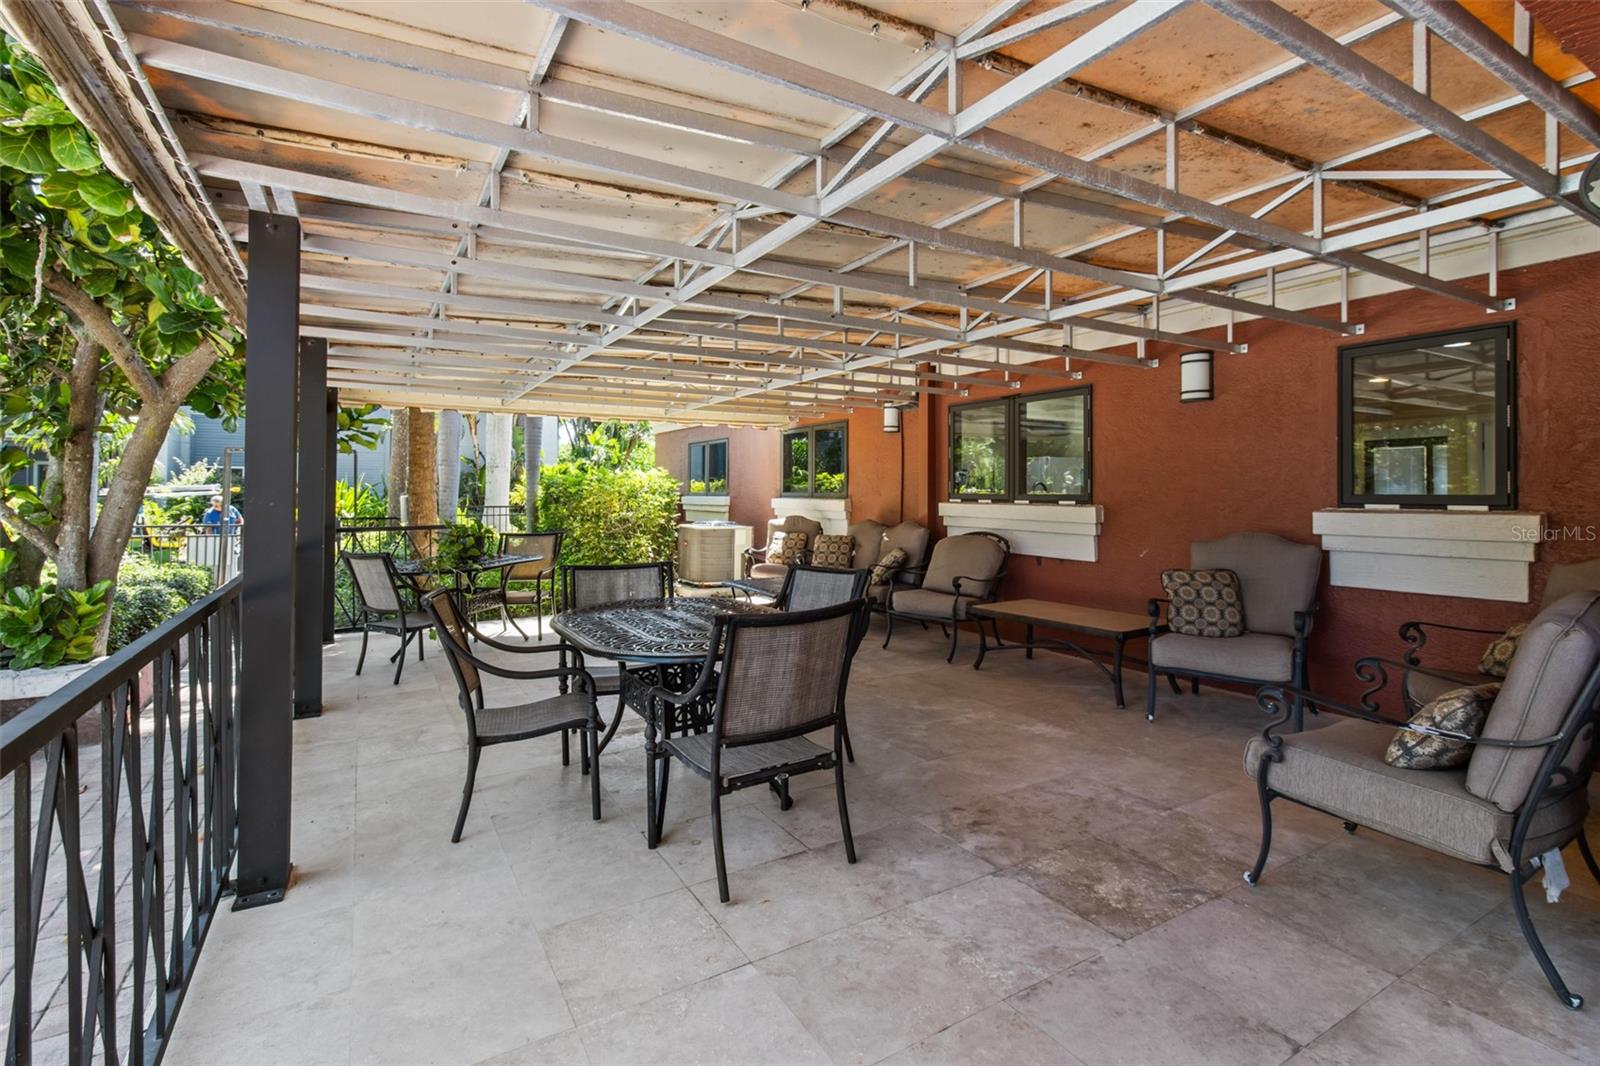 Covered patio, perfect for hosting gatherings and parties.